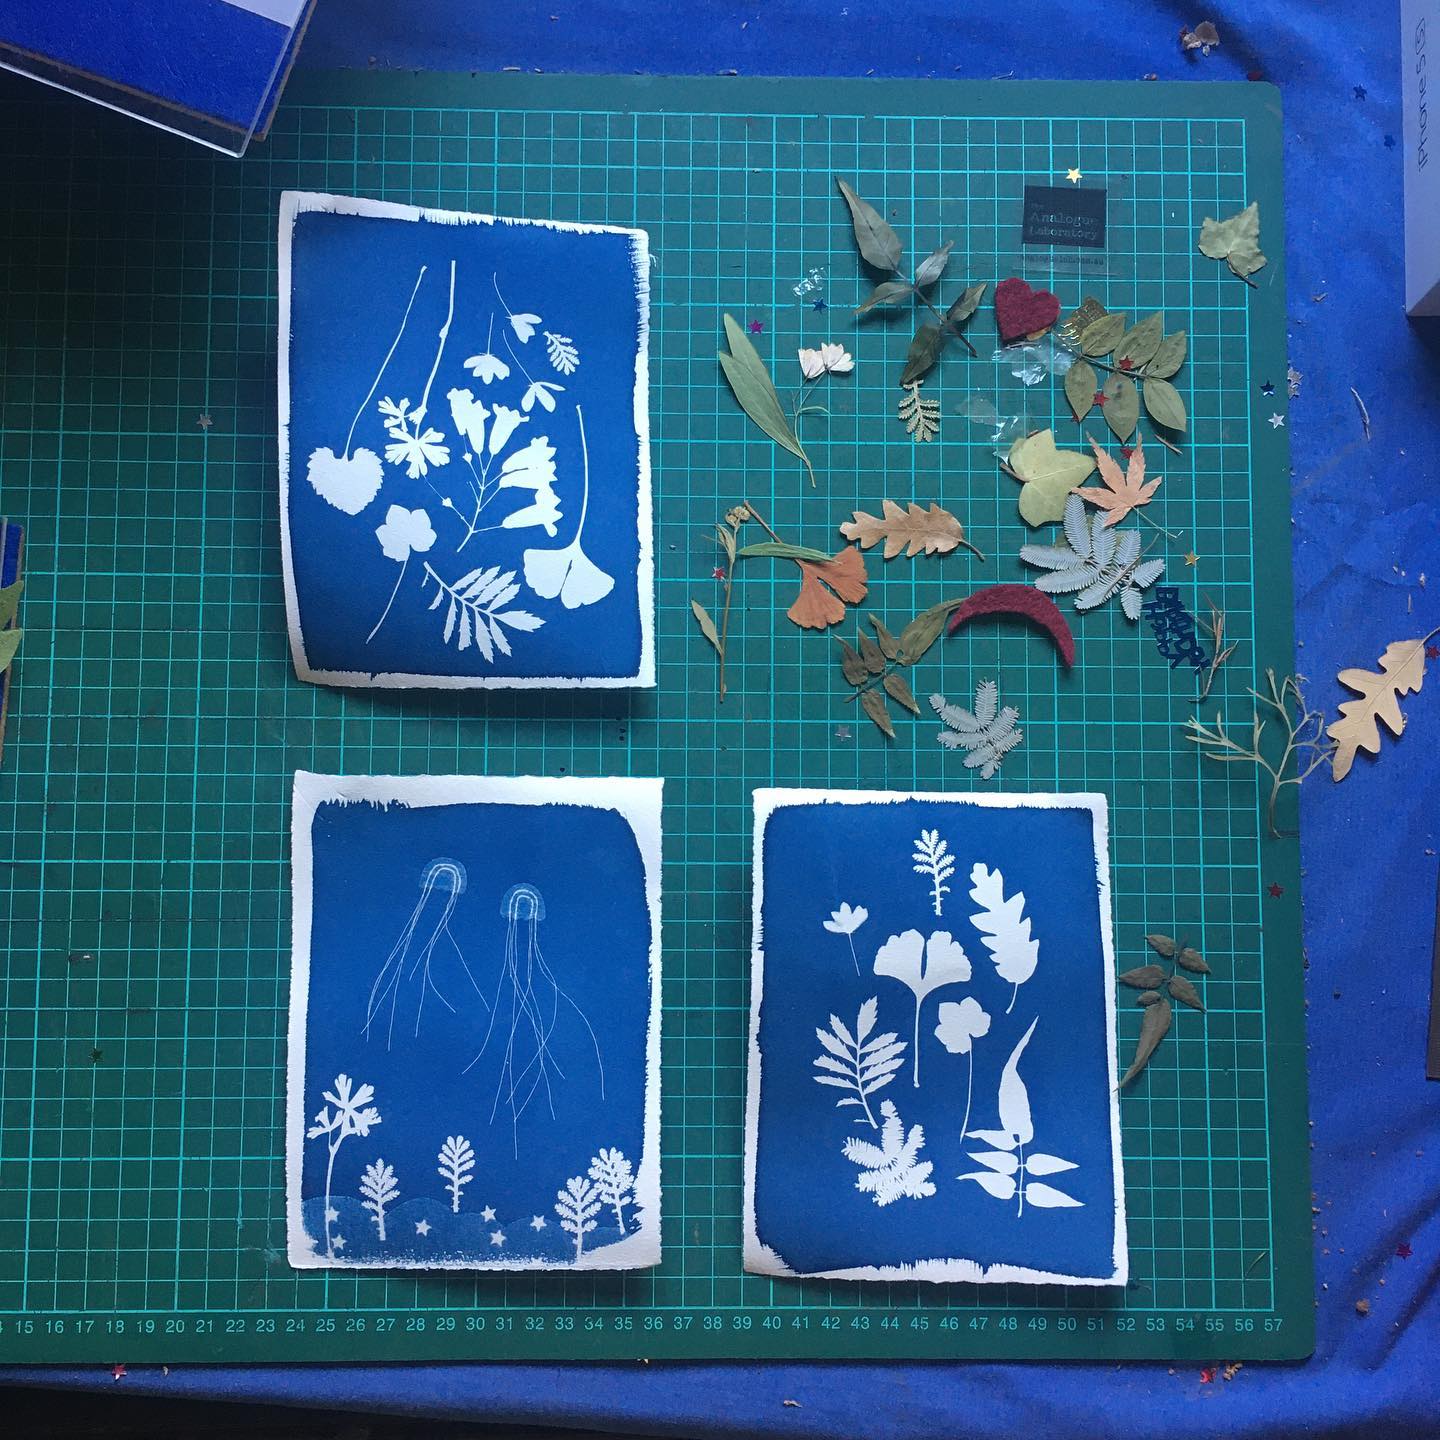 Another perfect day for cyanotypes 💙 Ideal projects for mailing to all your dear friends, all over the world. There’s nothing quite like a happy surprise in the mail 💌
.
.
#chinup #allinthistogether #cyanotype #makeathing #photogram #kidfriendlyprojects